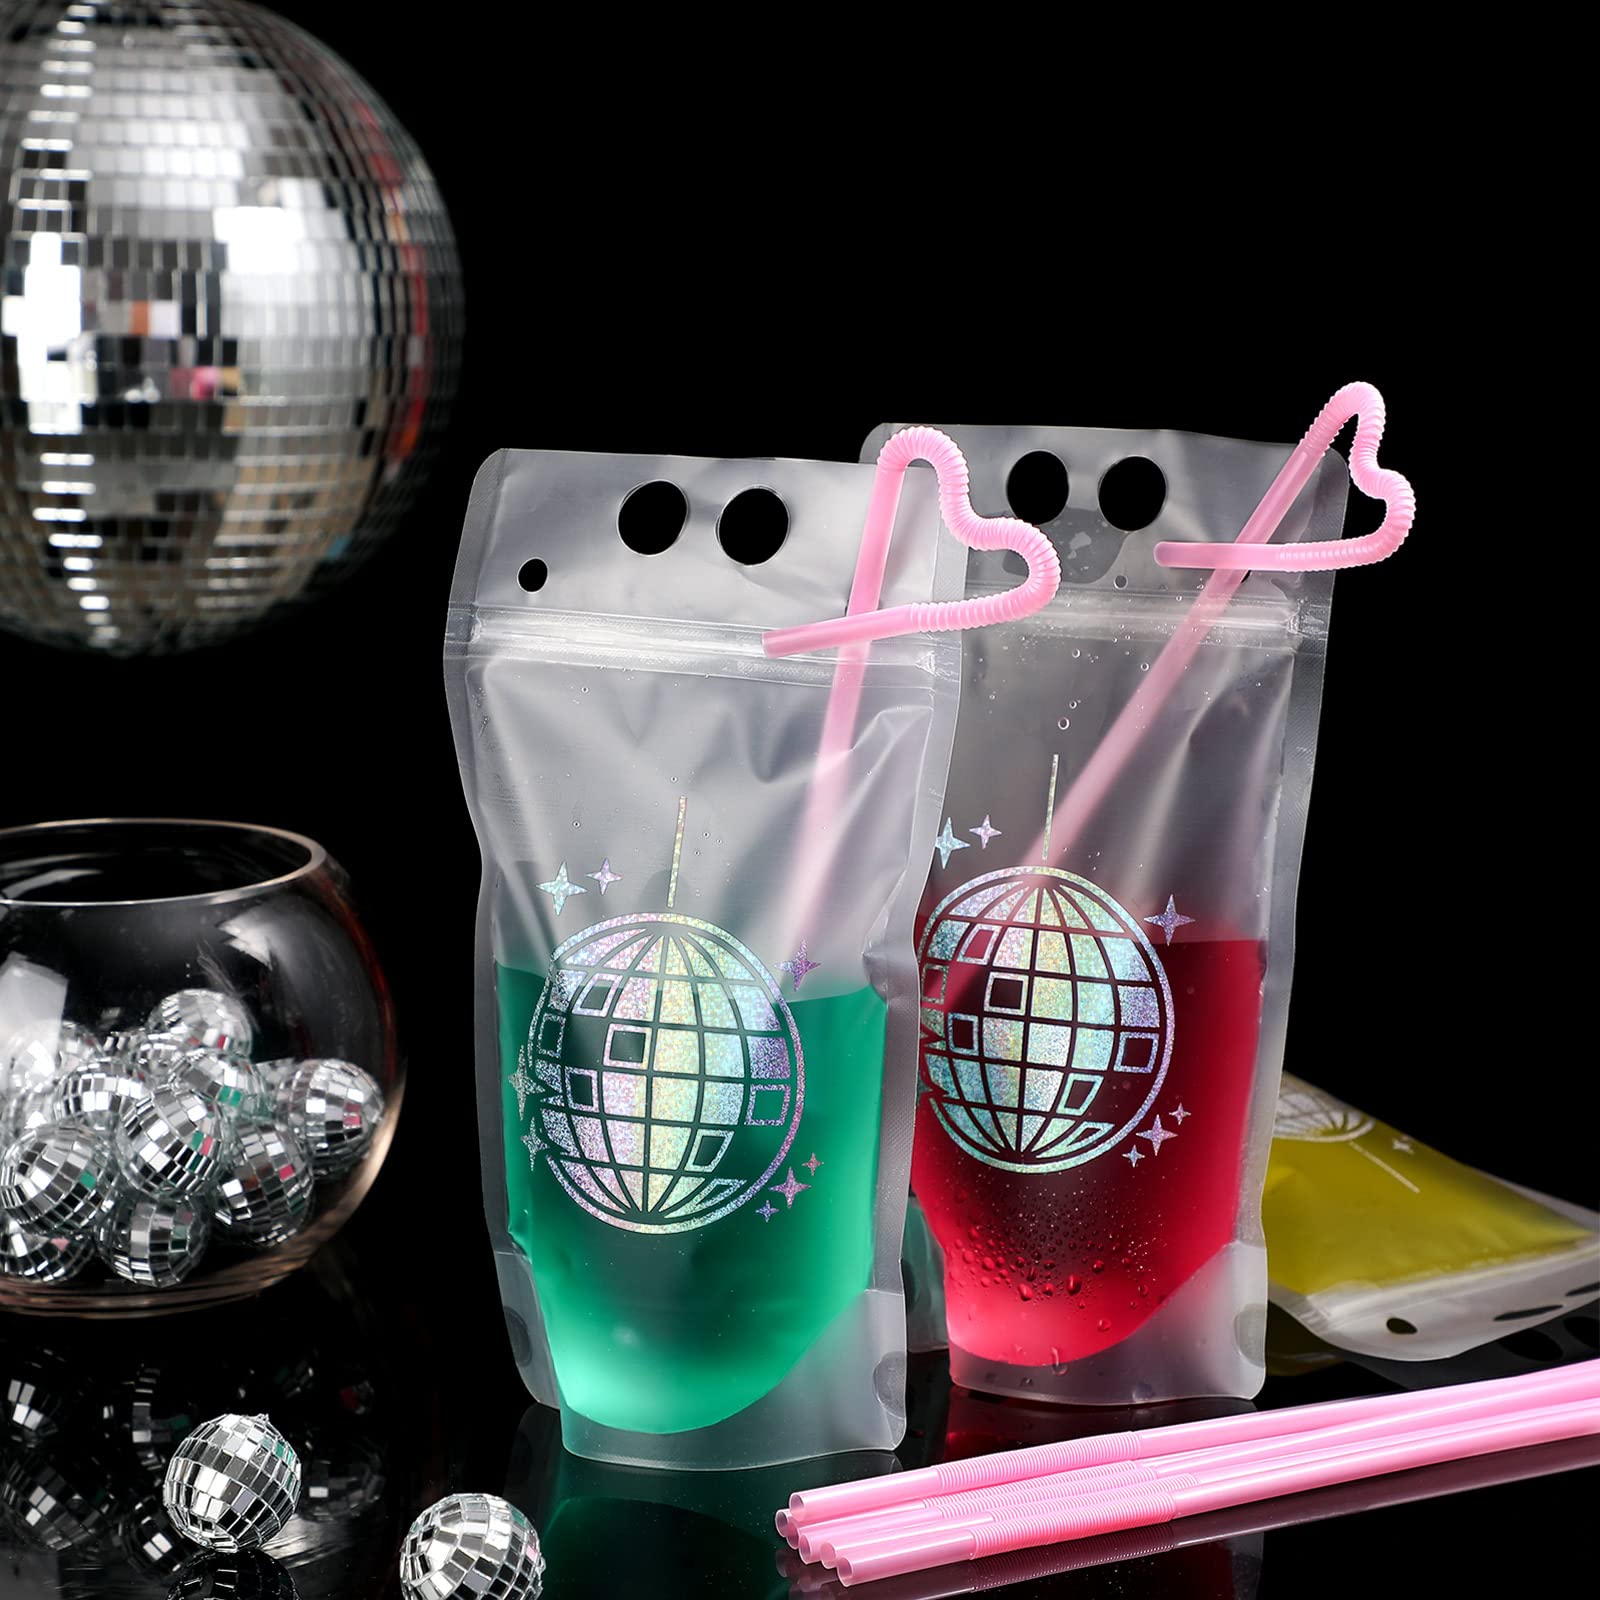 Hoolerry 72 Pcs Disco Pouches for Drinks Adult Drink Pouches 70s Disco Party Drink Pouches with Straws Resealable Disco Theme Drink Bags Plastic Zipper Clear Juice Pouches for Party Supplies (Classic)